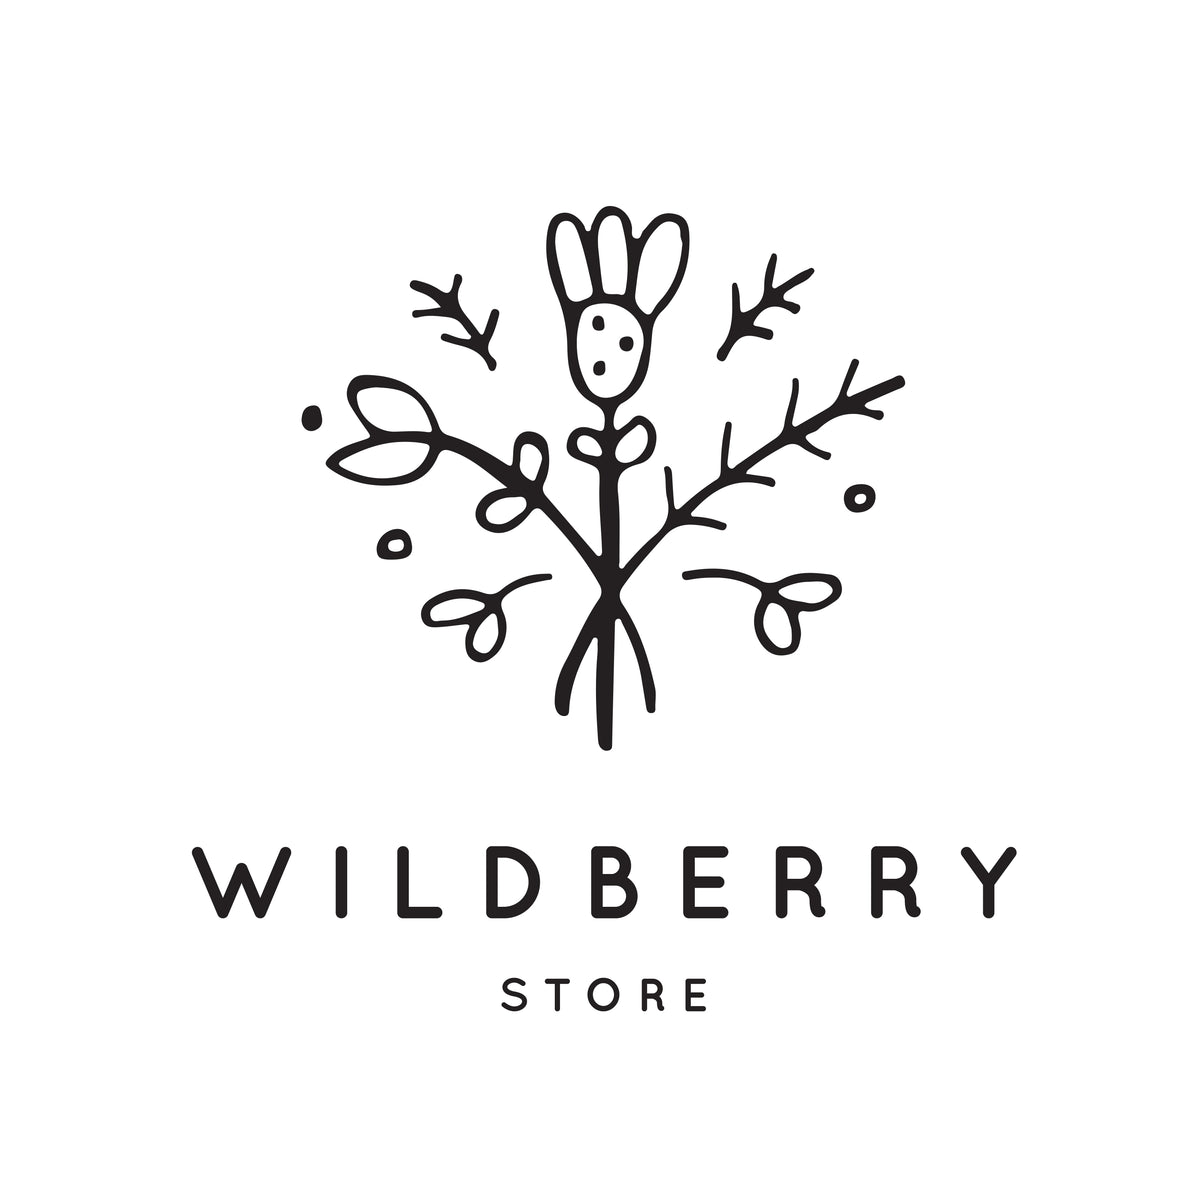 Top Files tagged as wildberries